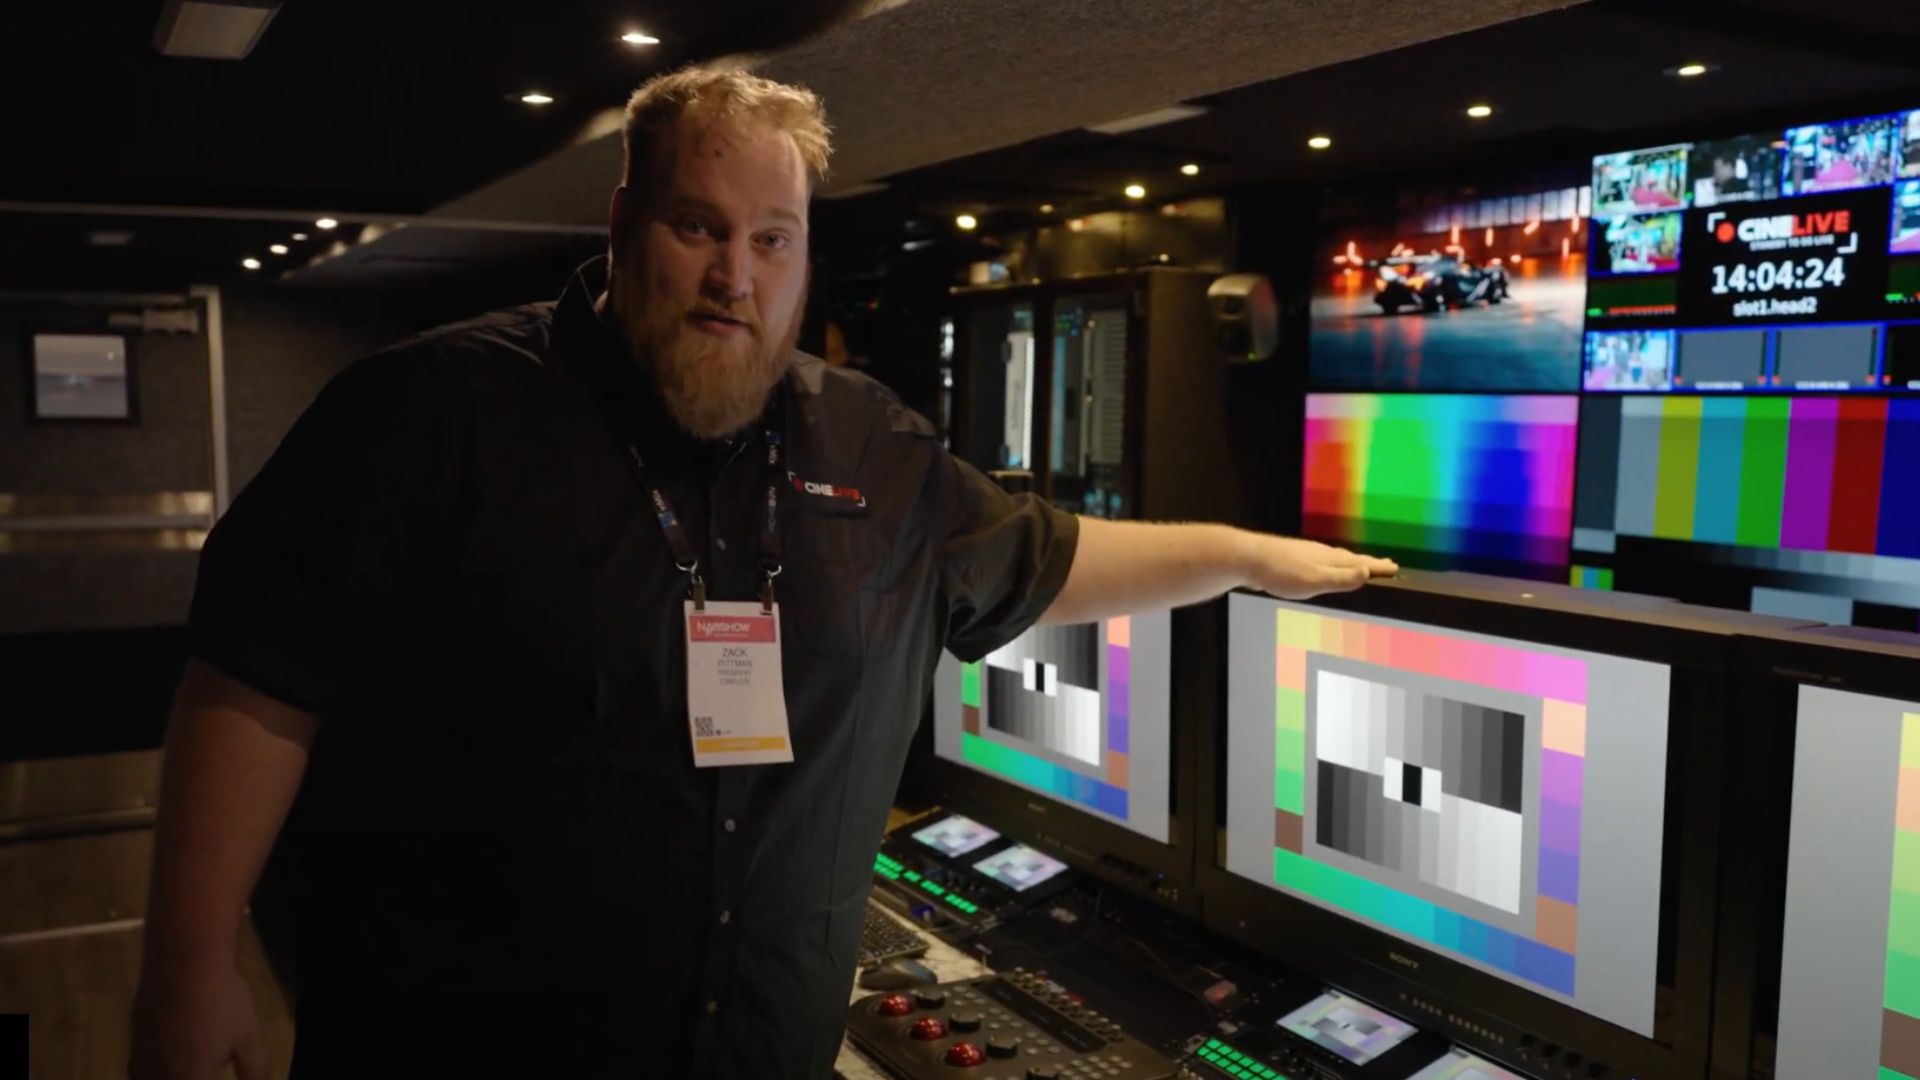 Zack Pittman shows us around the giant new CineLive Broadcast Truck